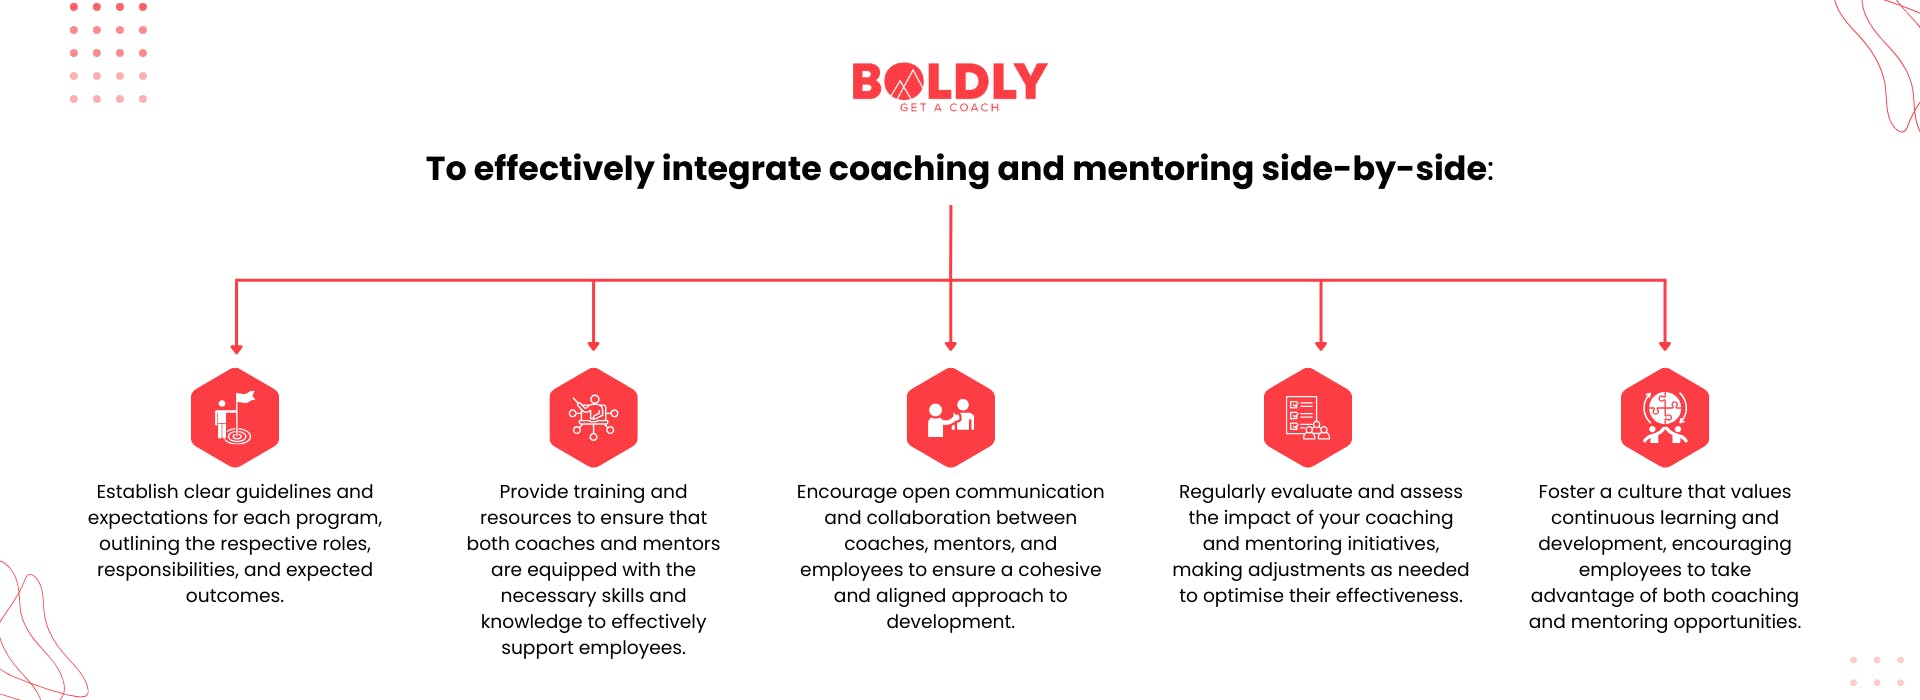 How to effectively integrate coaching and mentoring together